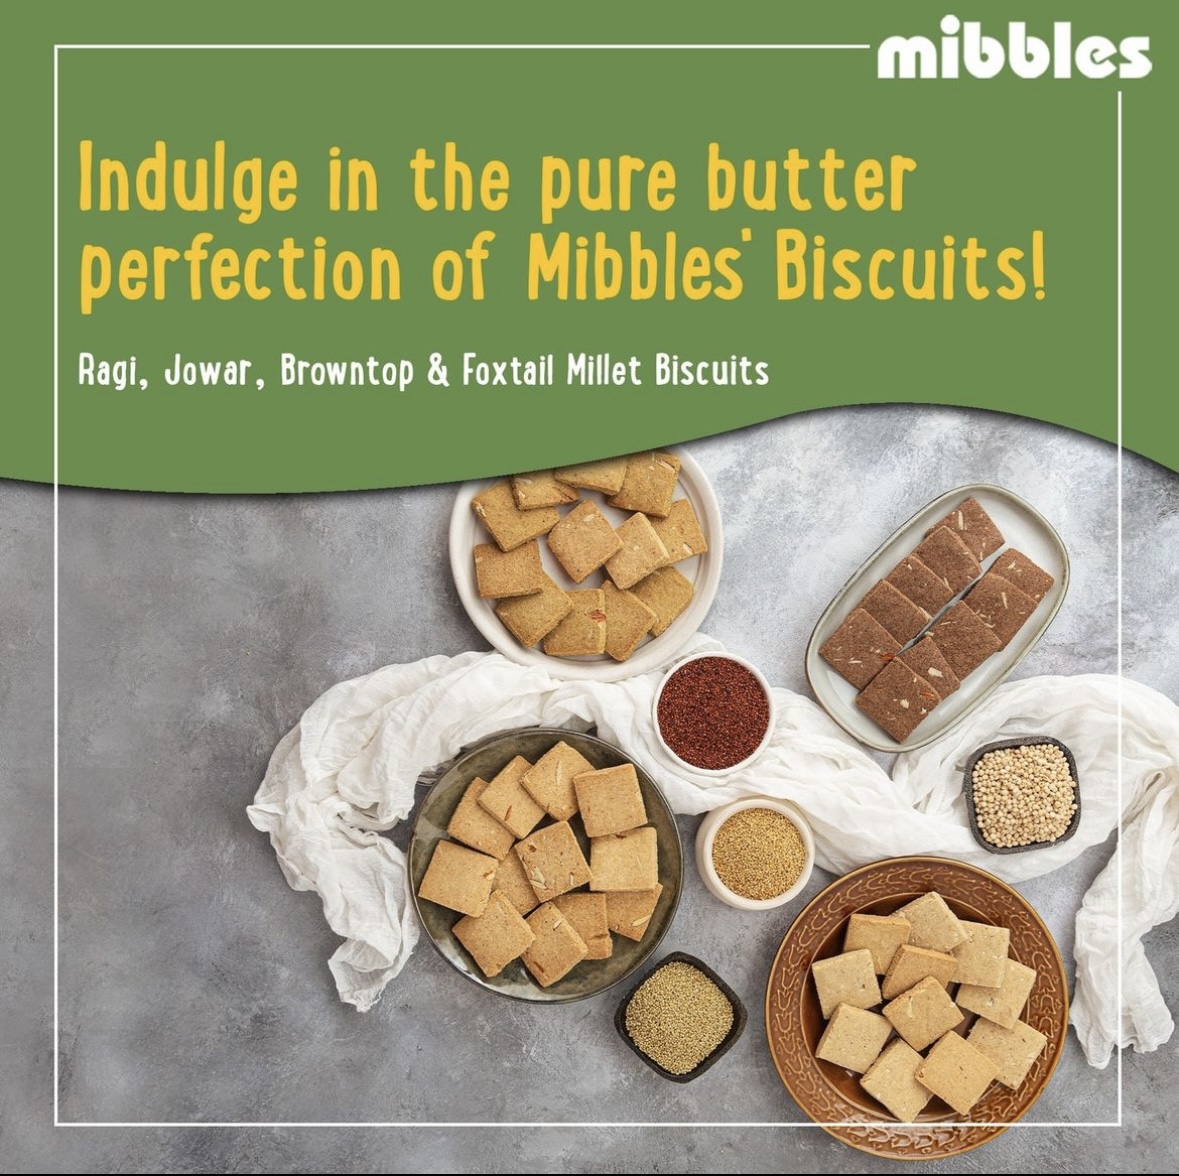 Mibbles Biscuits – The Perfect Snack for Anytime, Anywhere